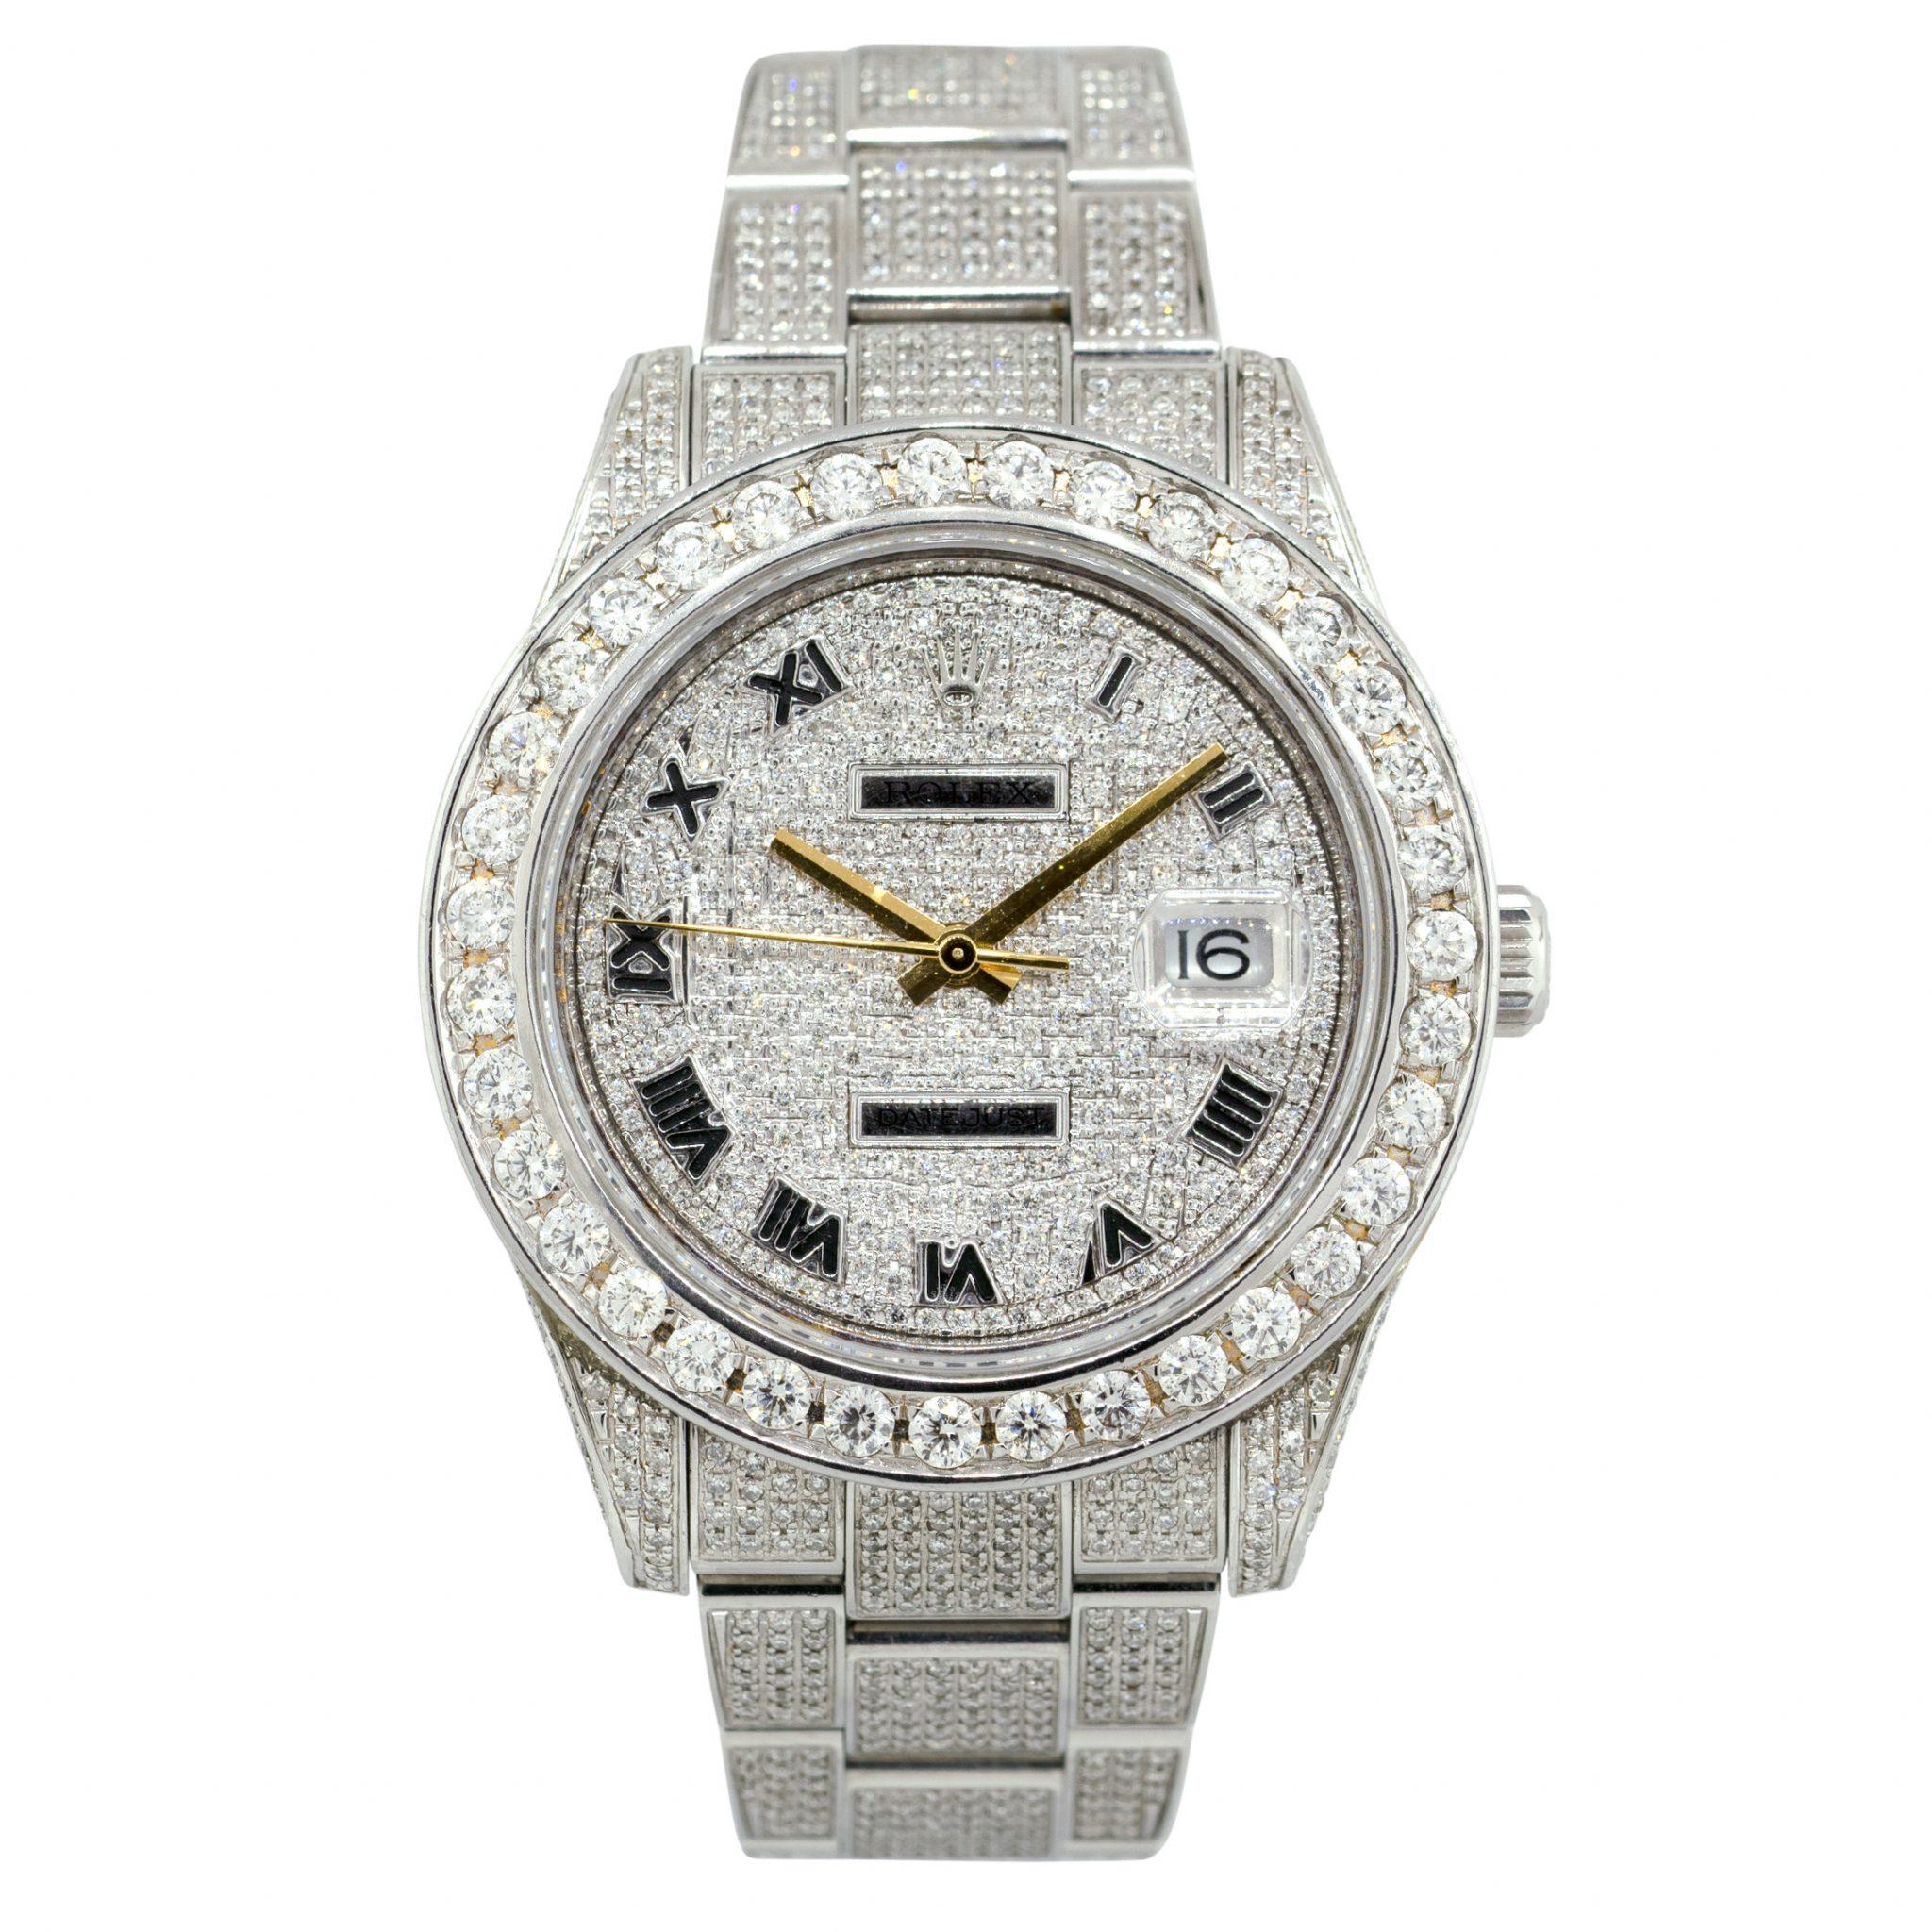 The Rolex 116334 Datejust Stainless Steel All Diamond Pave Watch is a true embodiment of luxury and elegance. Crafted from stainless steel, this timepiece is adorned with a breathtaking array of diamonds, creating a stunning pave-set design that